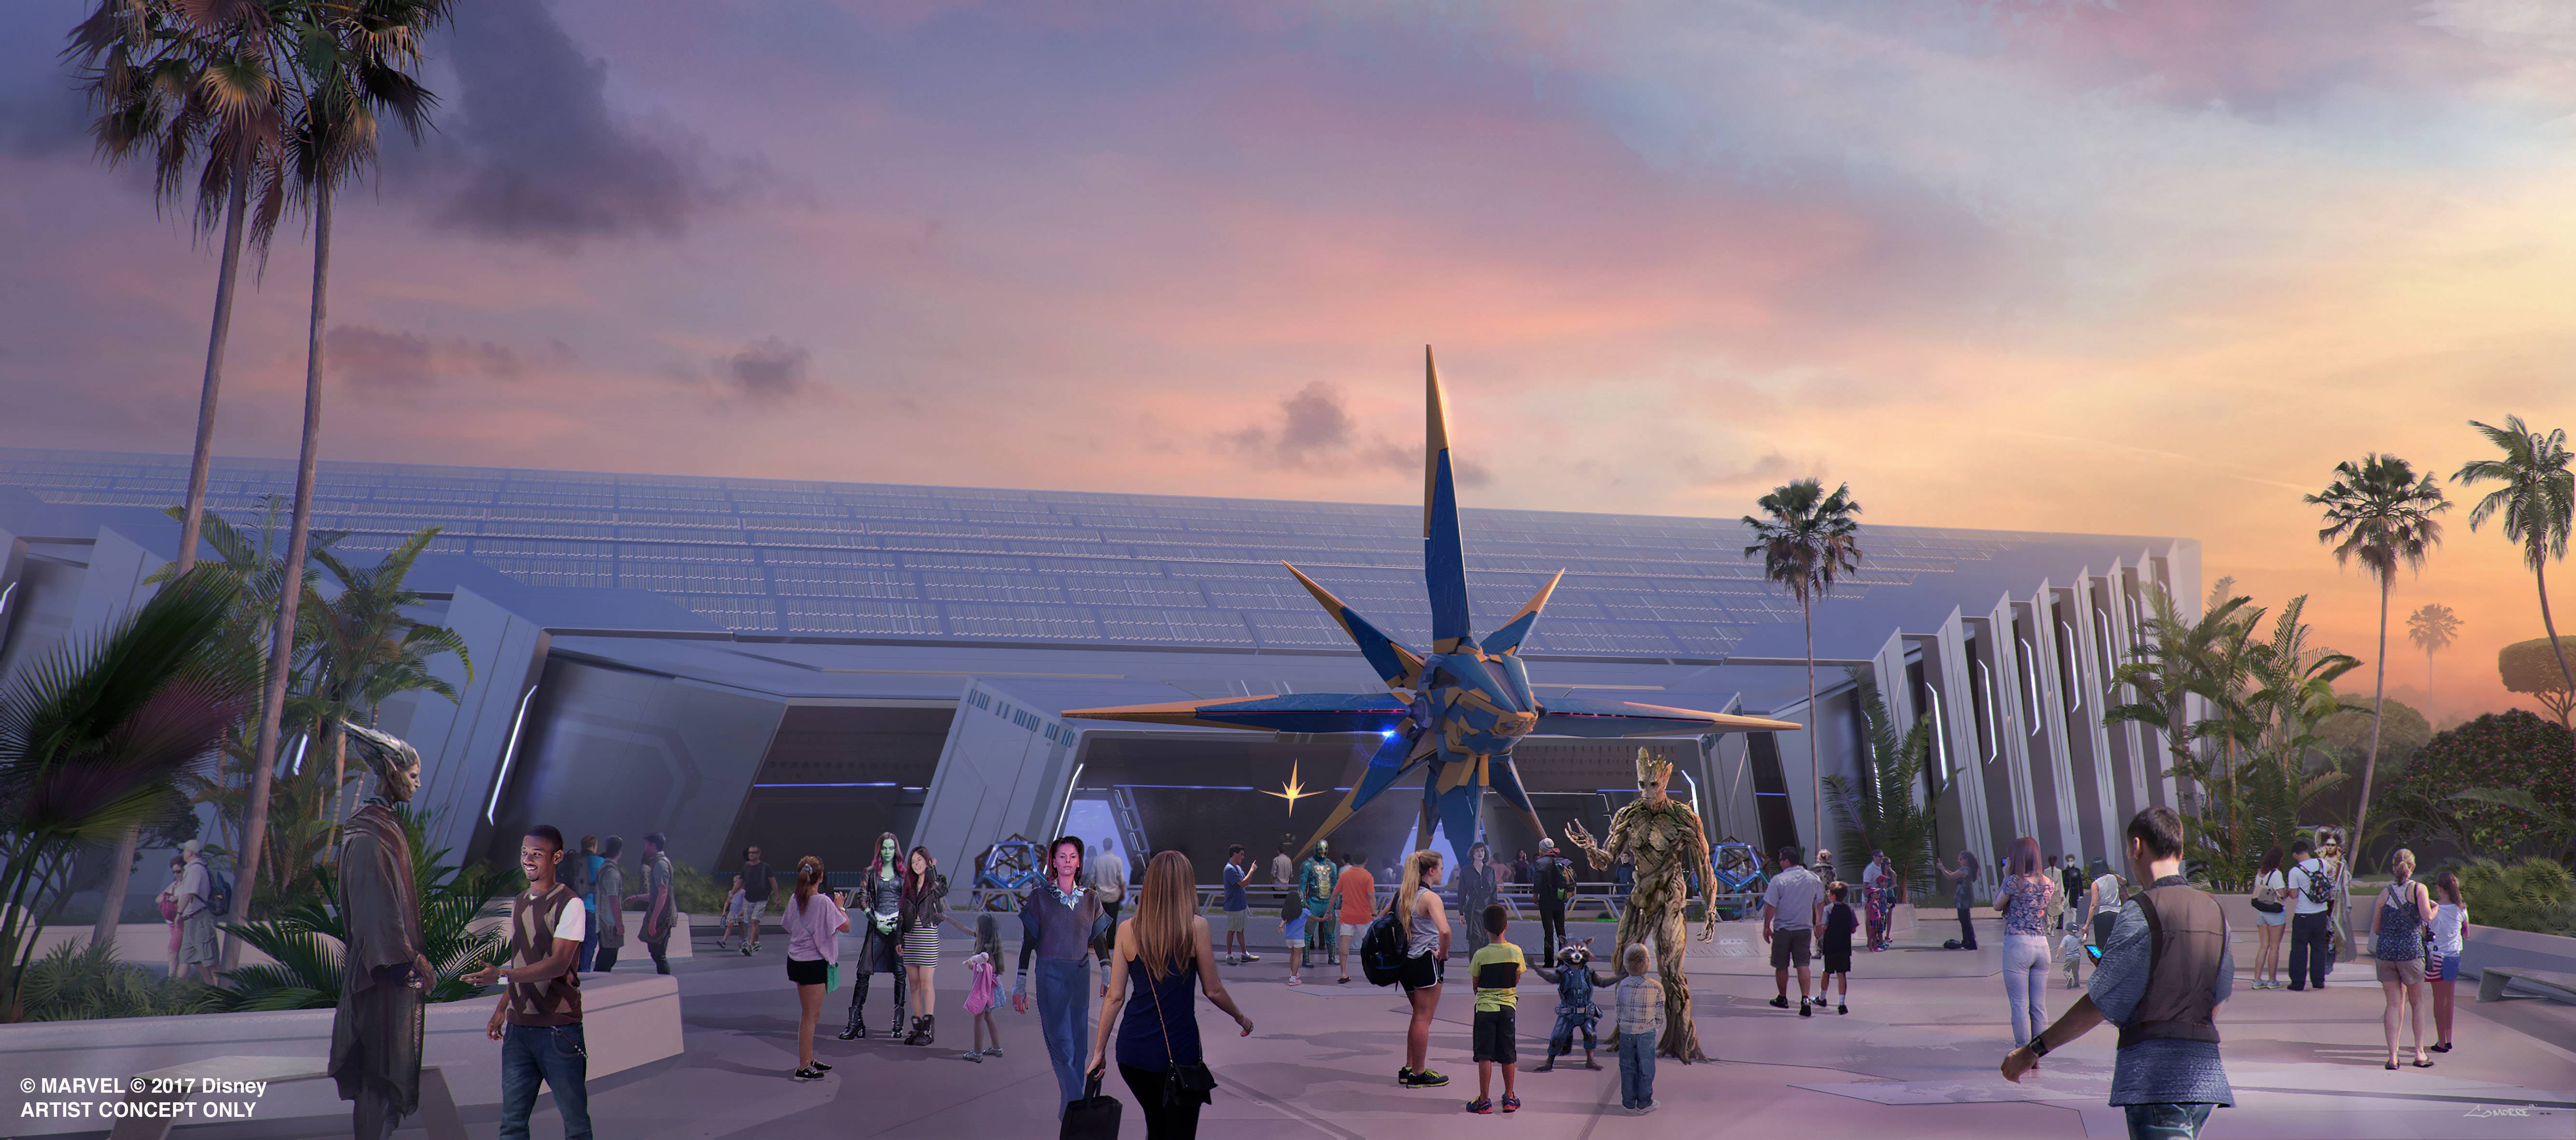 Guardians of the Galaxy Cosmic Rewind is expected to be offered as an Individual Lightning Lane selection